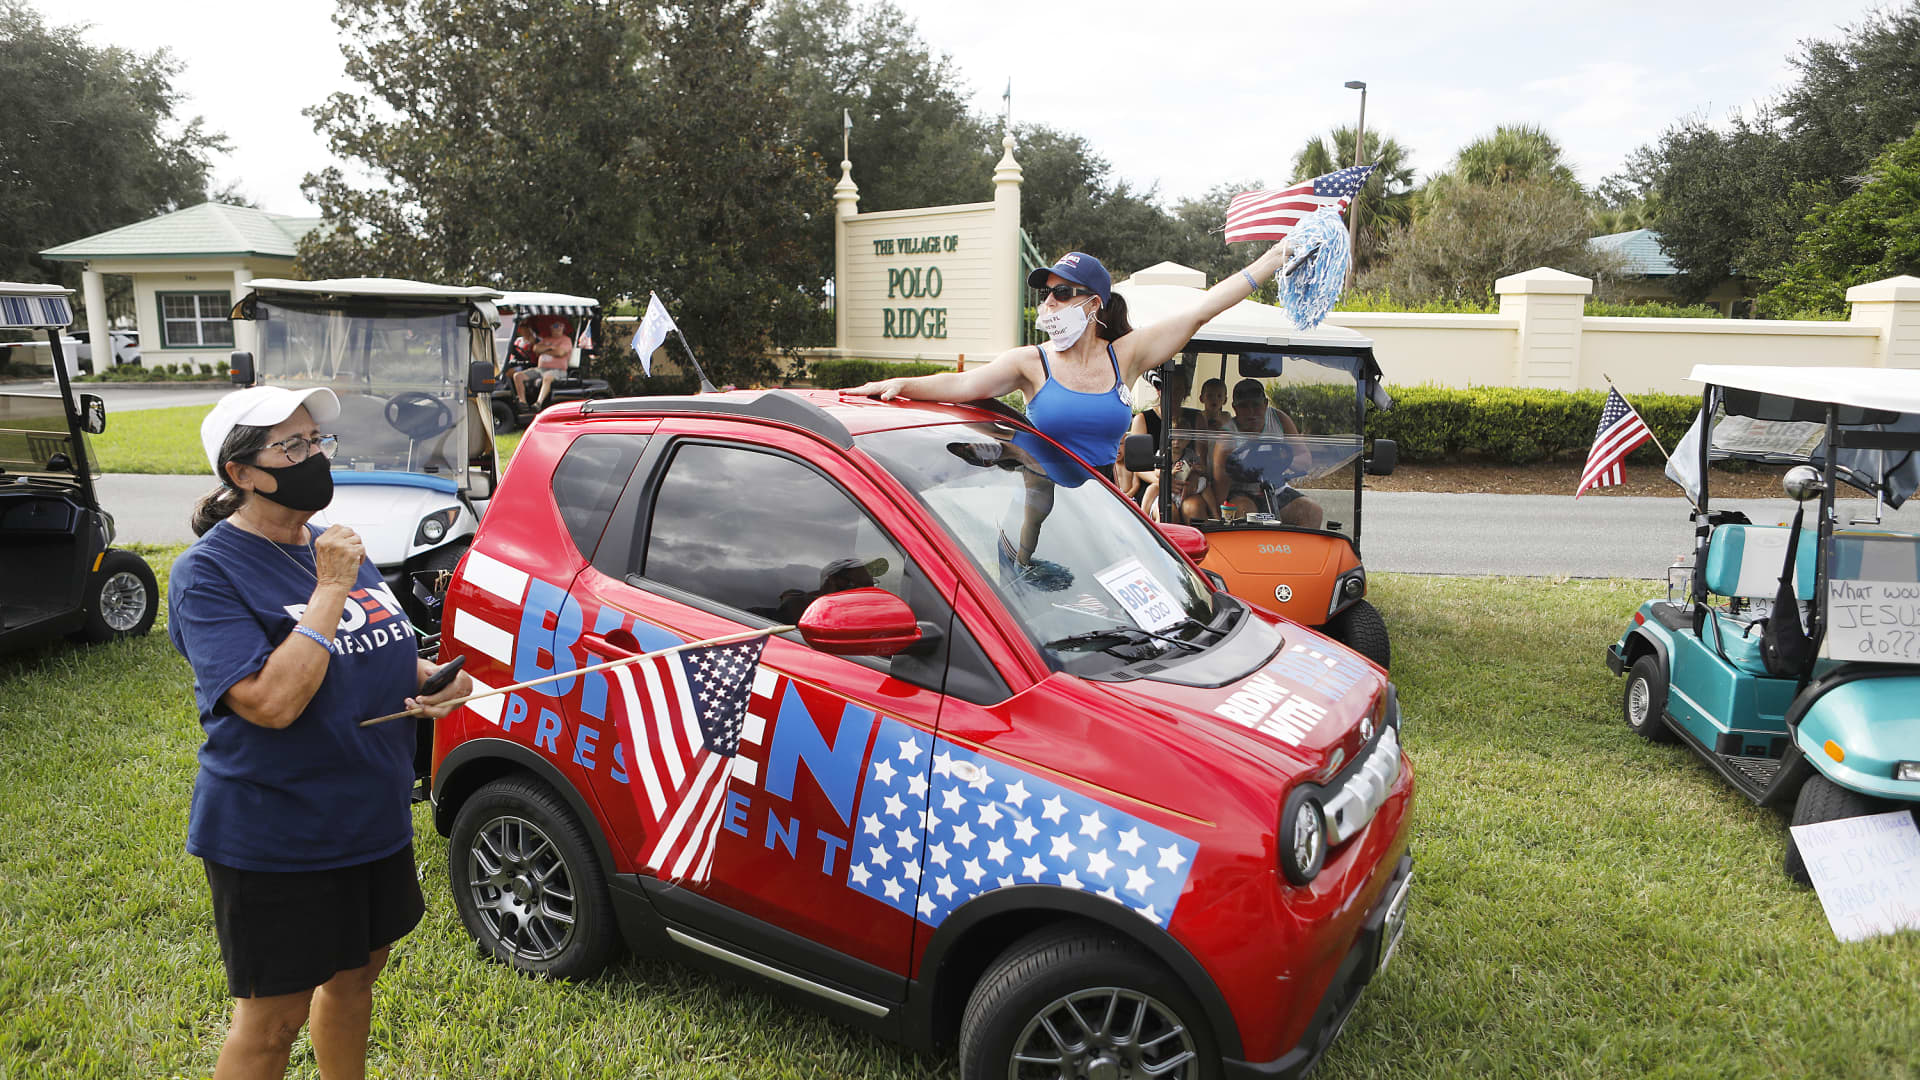 Paula Orlando, a supporters of Democratic Presidential nominee Joe Biden, waves her flag next to her car during President Donald Trump's campaign stop at The Villages Polo Club on October 23, 2020 in The Villages, Florida.